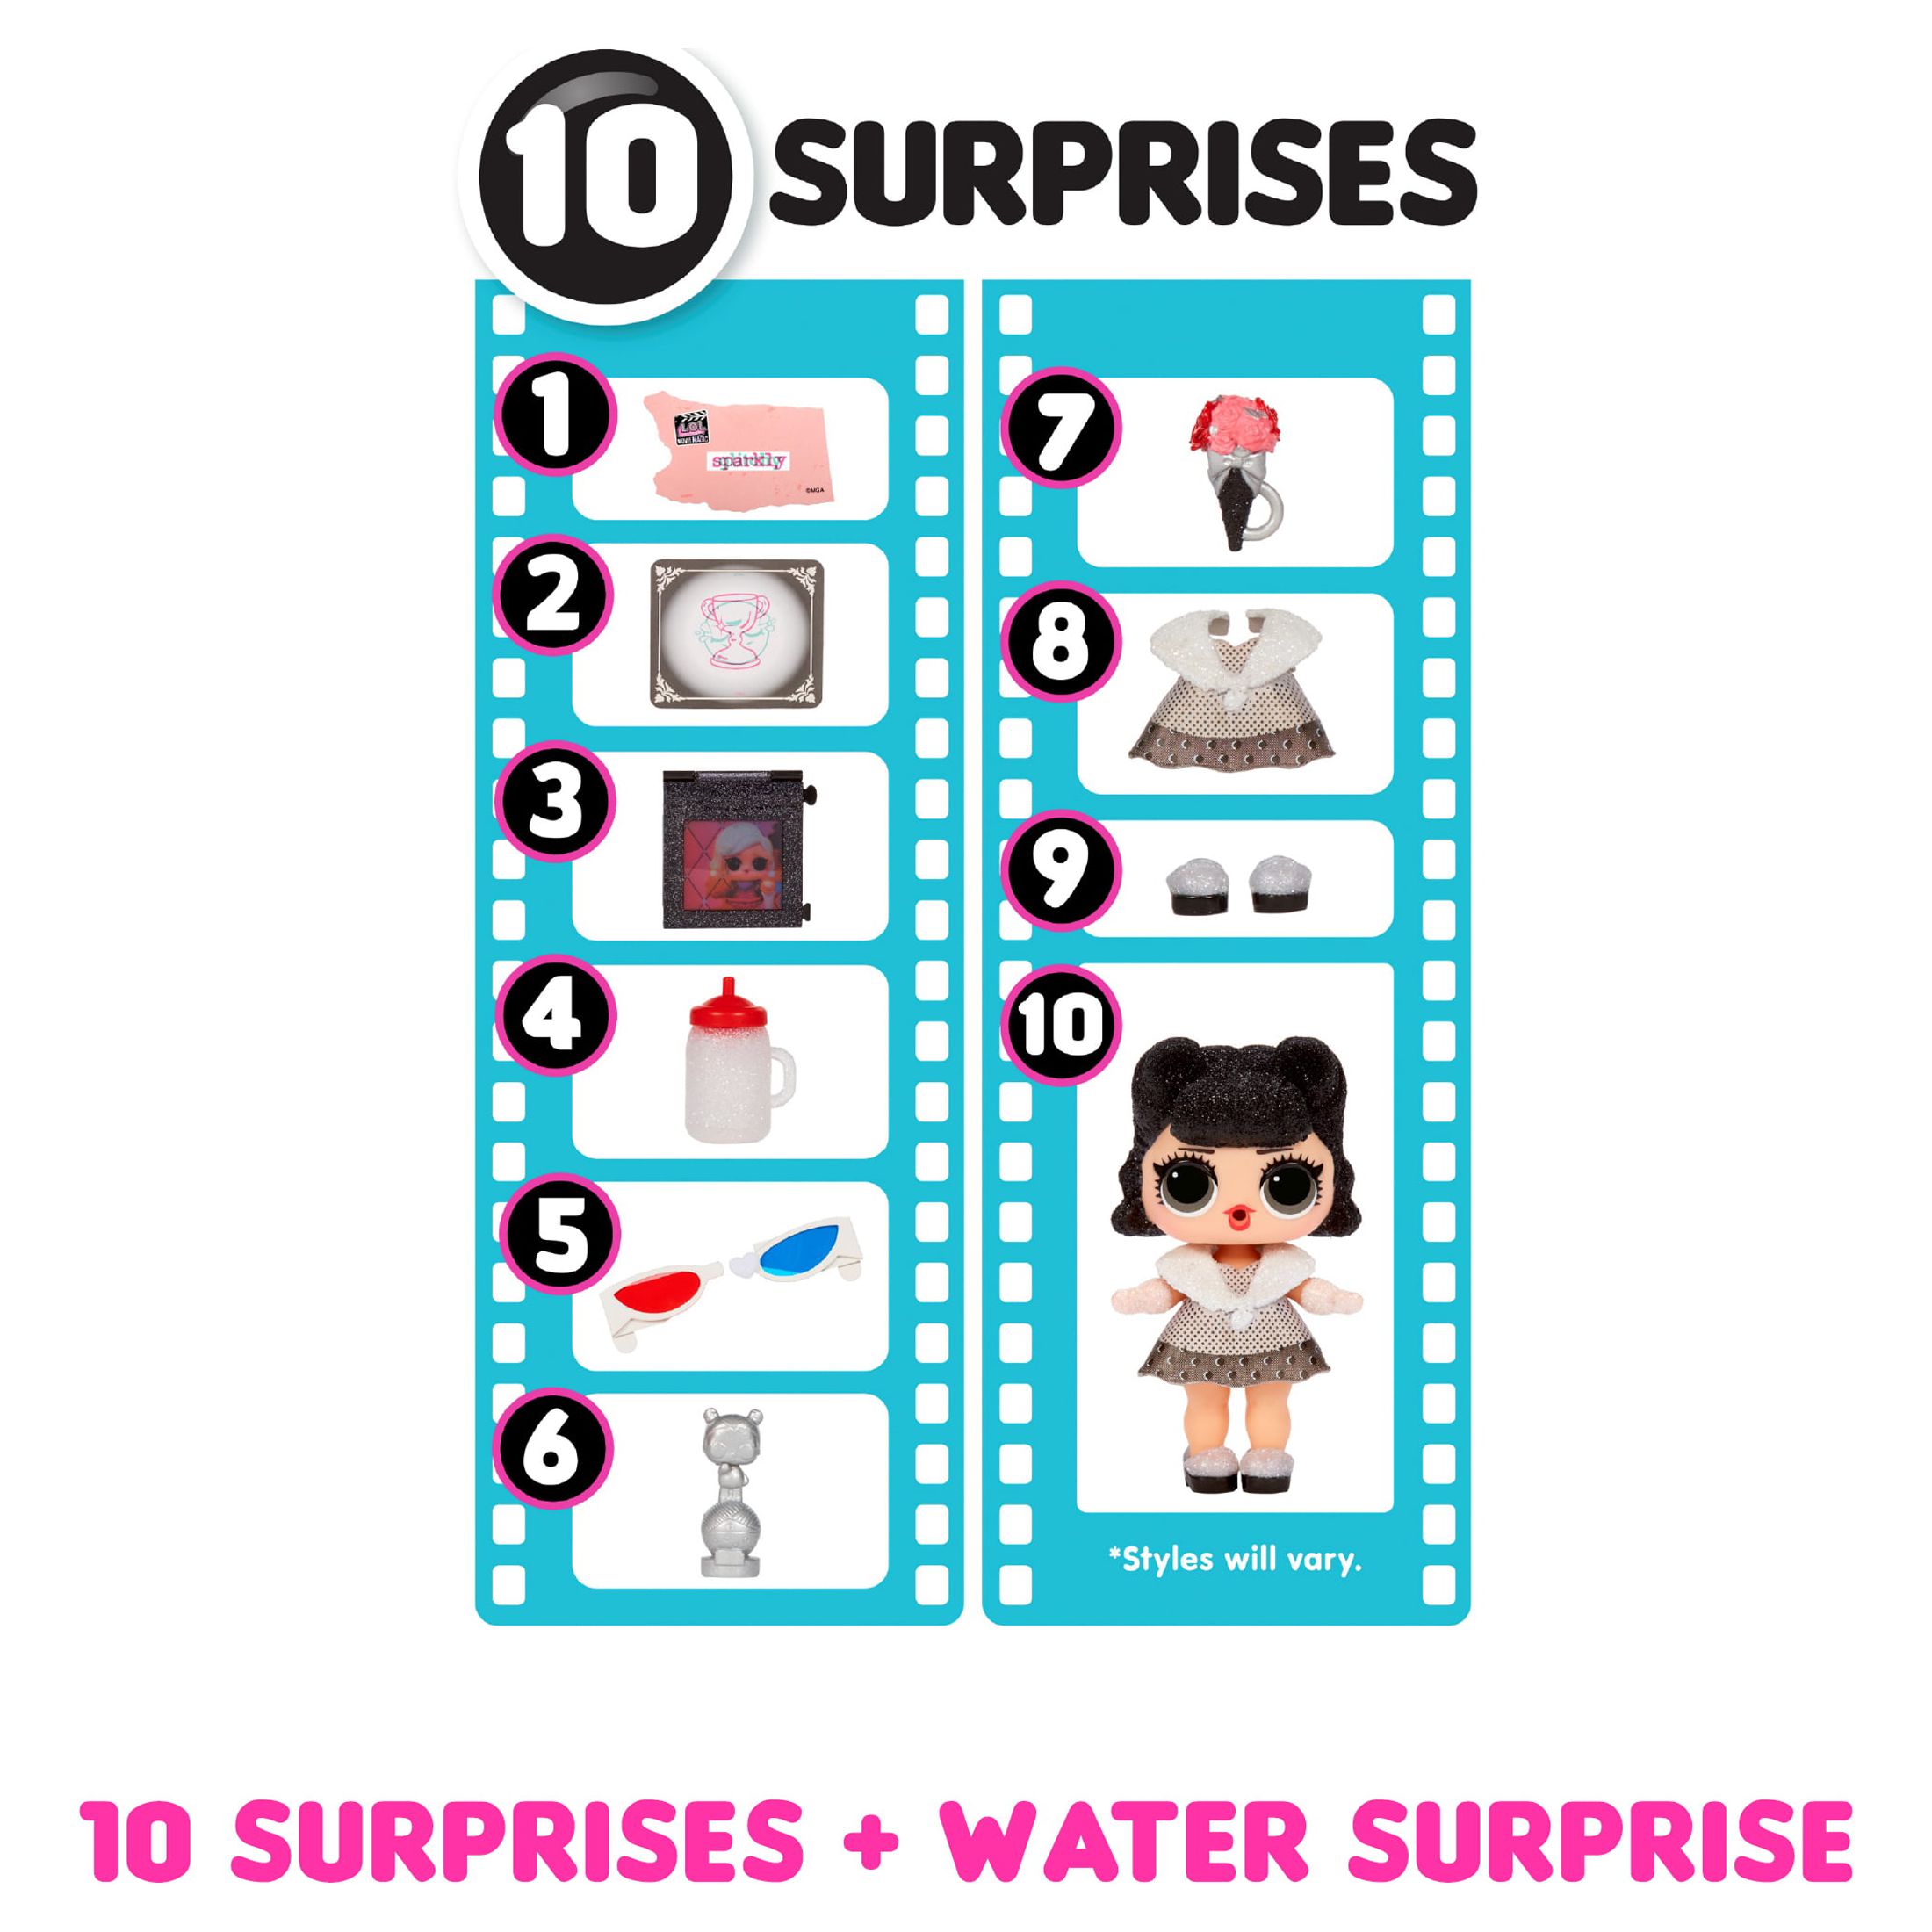 LOL Surprise Movie Magic Dolls With 10 Surprises Including Movie Props, Great Gift for Kids Ages 4 5 6+ - image 5 of 8